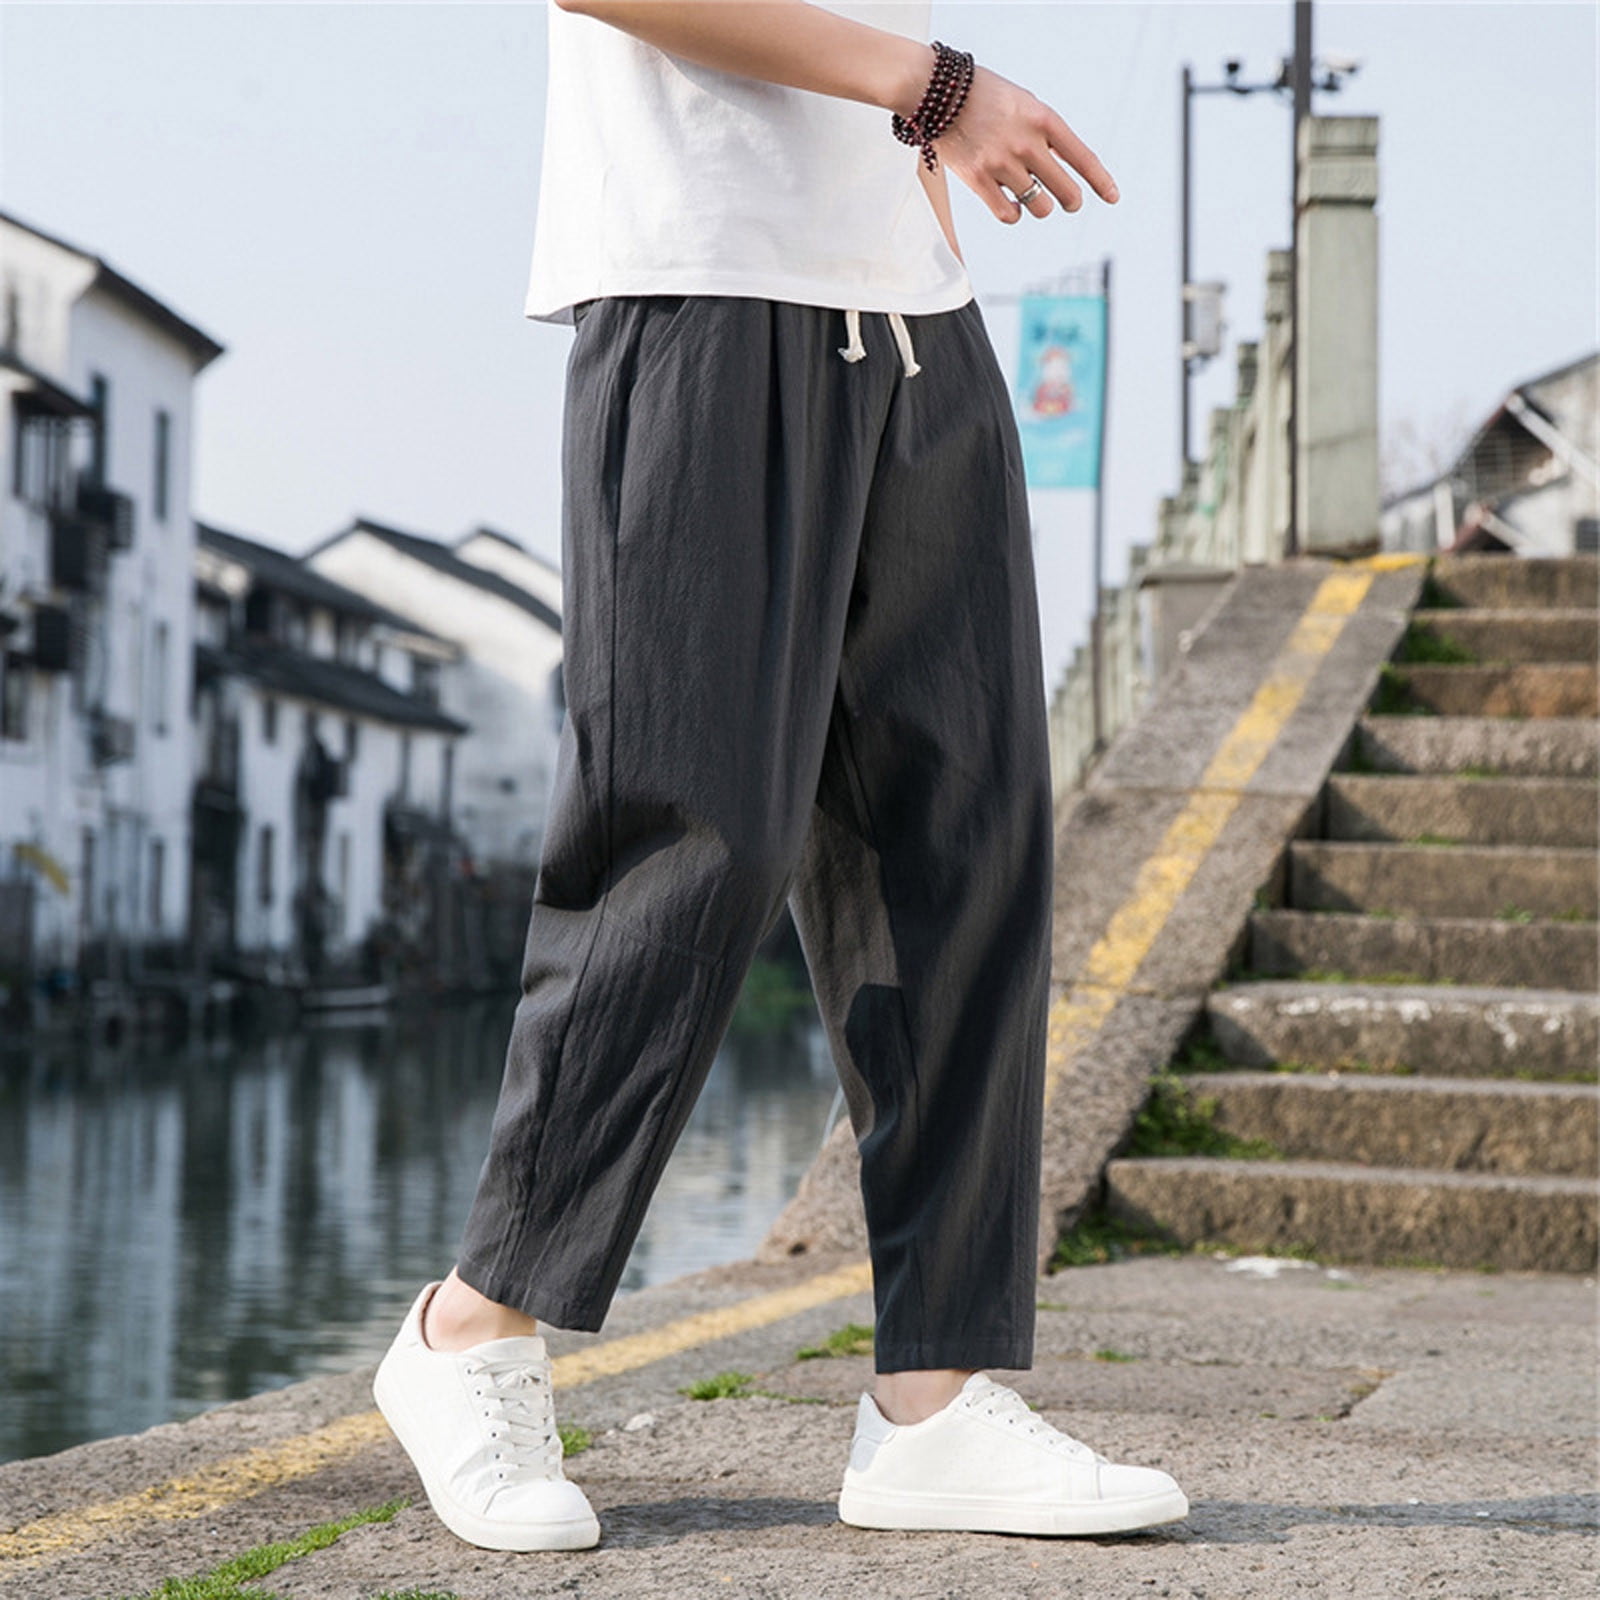 The 40 Best Mens Pants to Buy in 2023 Accoridng to Fashion Editors